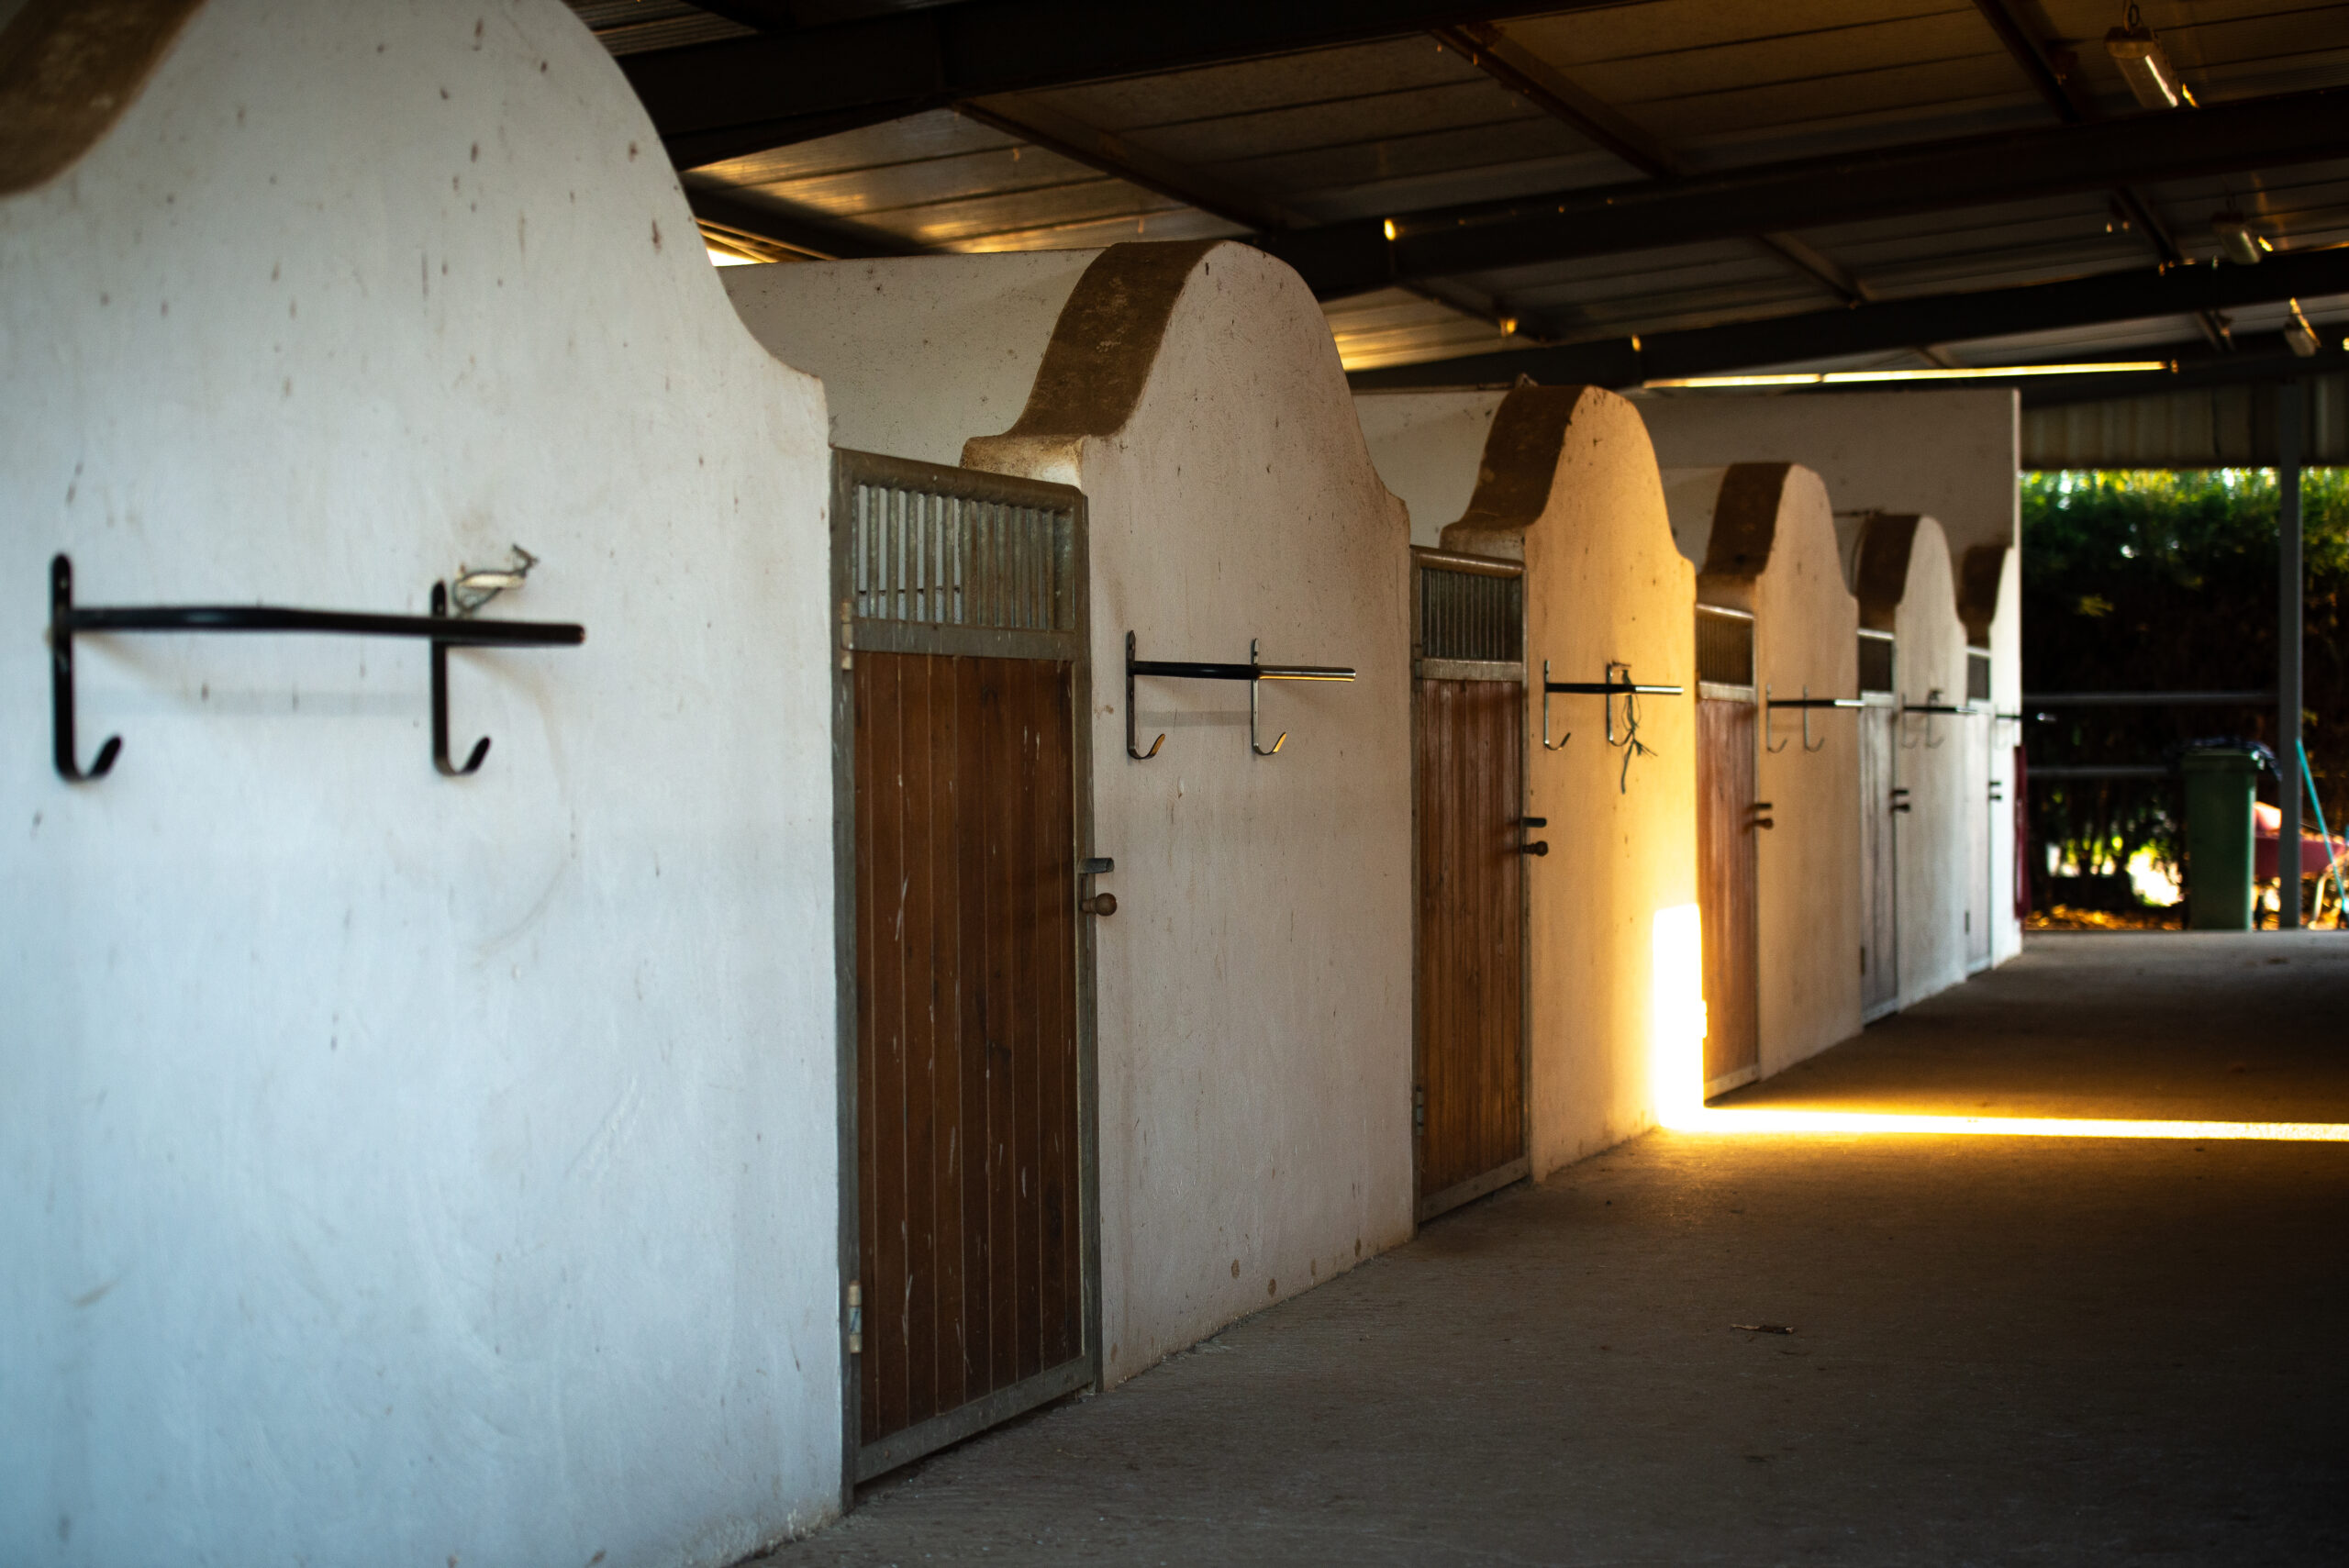 Stable alley with five boxes on the left in a brick built American barn in the evening light